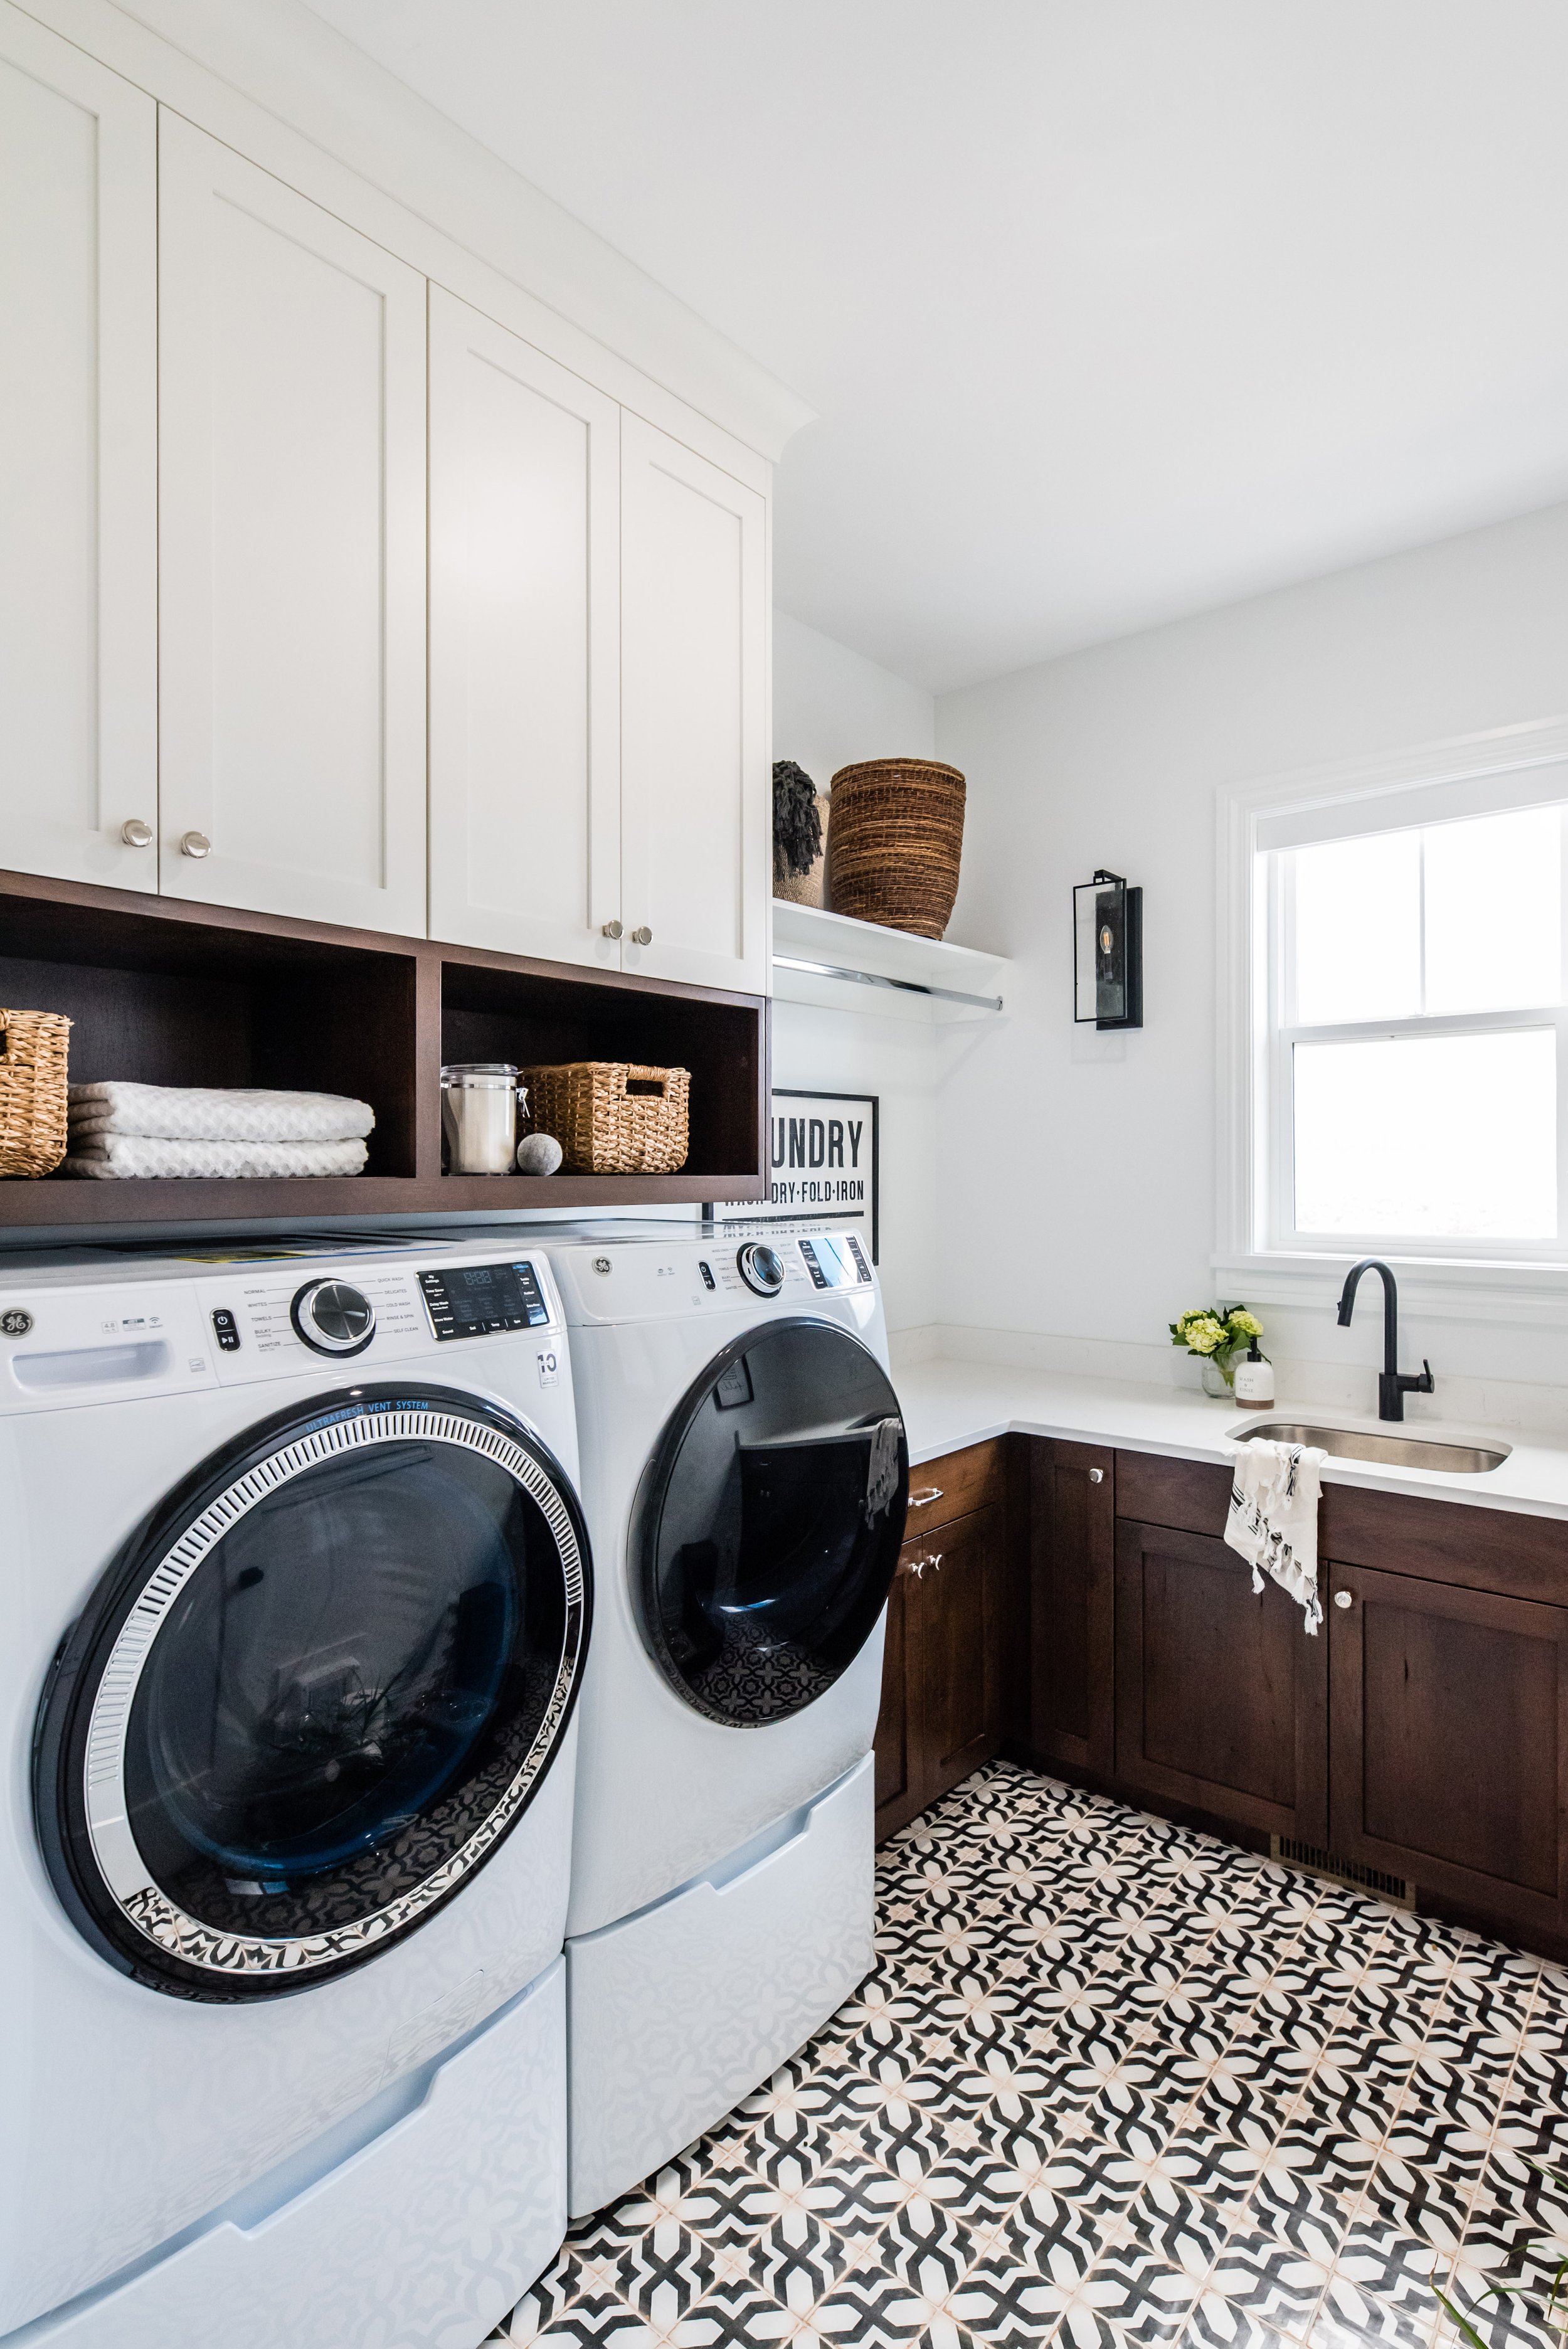  Remodel the laundry room with the help of a virtual interior designer by Liz Powell Design. quick online design service professional hands-on help #LizPowellDesign #InteriorDesignUtah #InteriorDesigner #CacheValleyInteriors  #LoganInteriorDesigner #